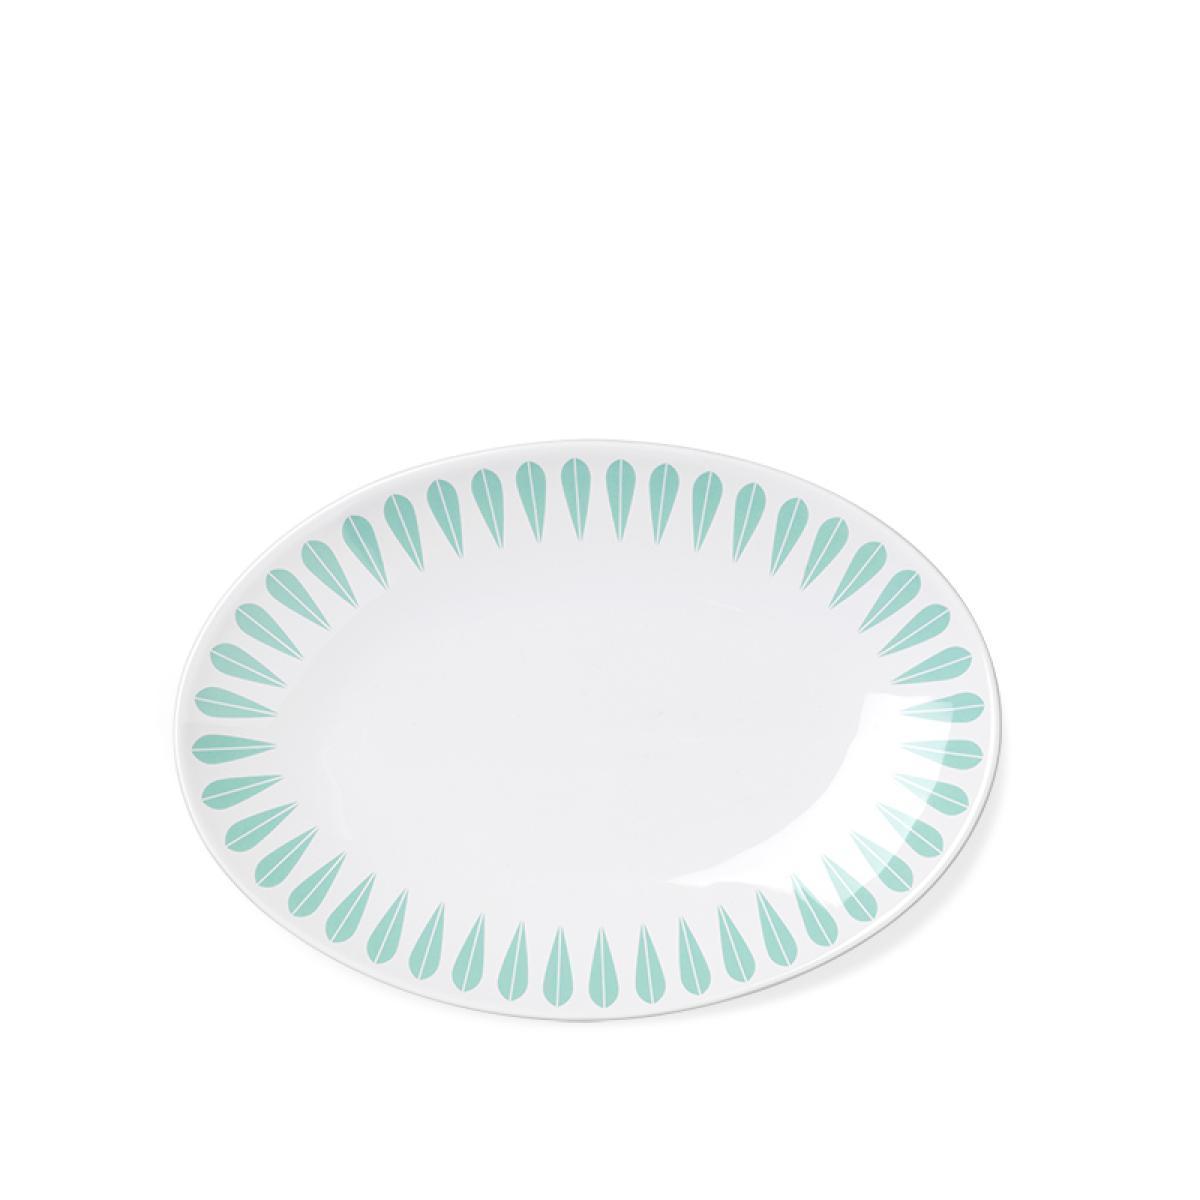 Lucie Kaas Arne Clausen Collection Serving Plate Mint Green, 29cm